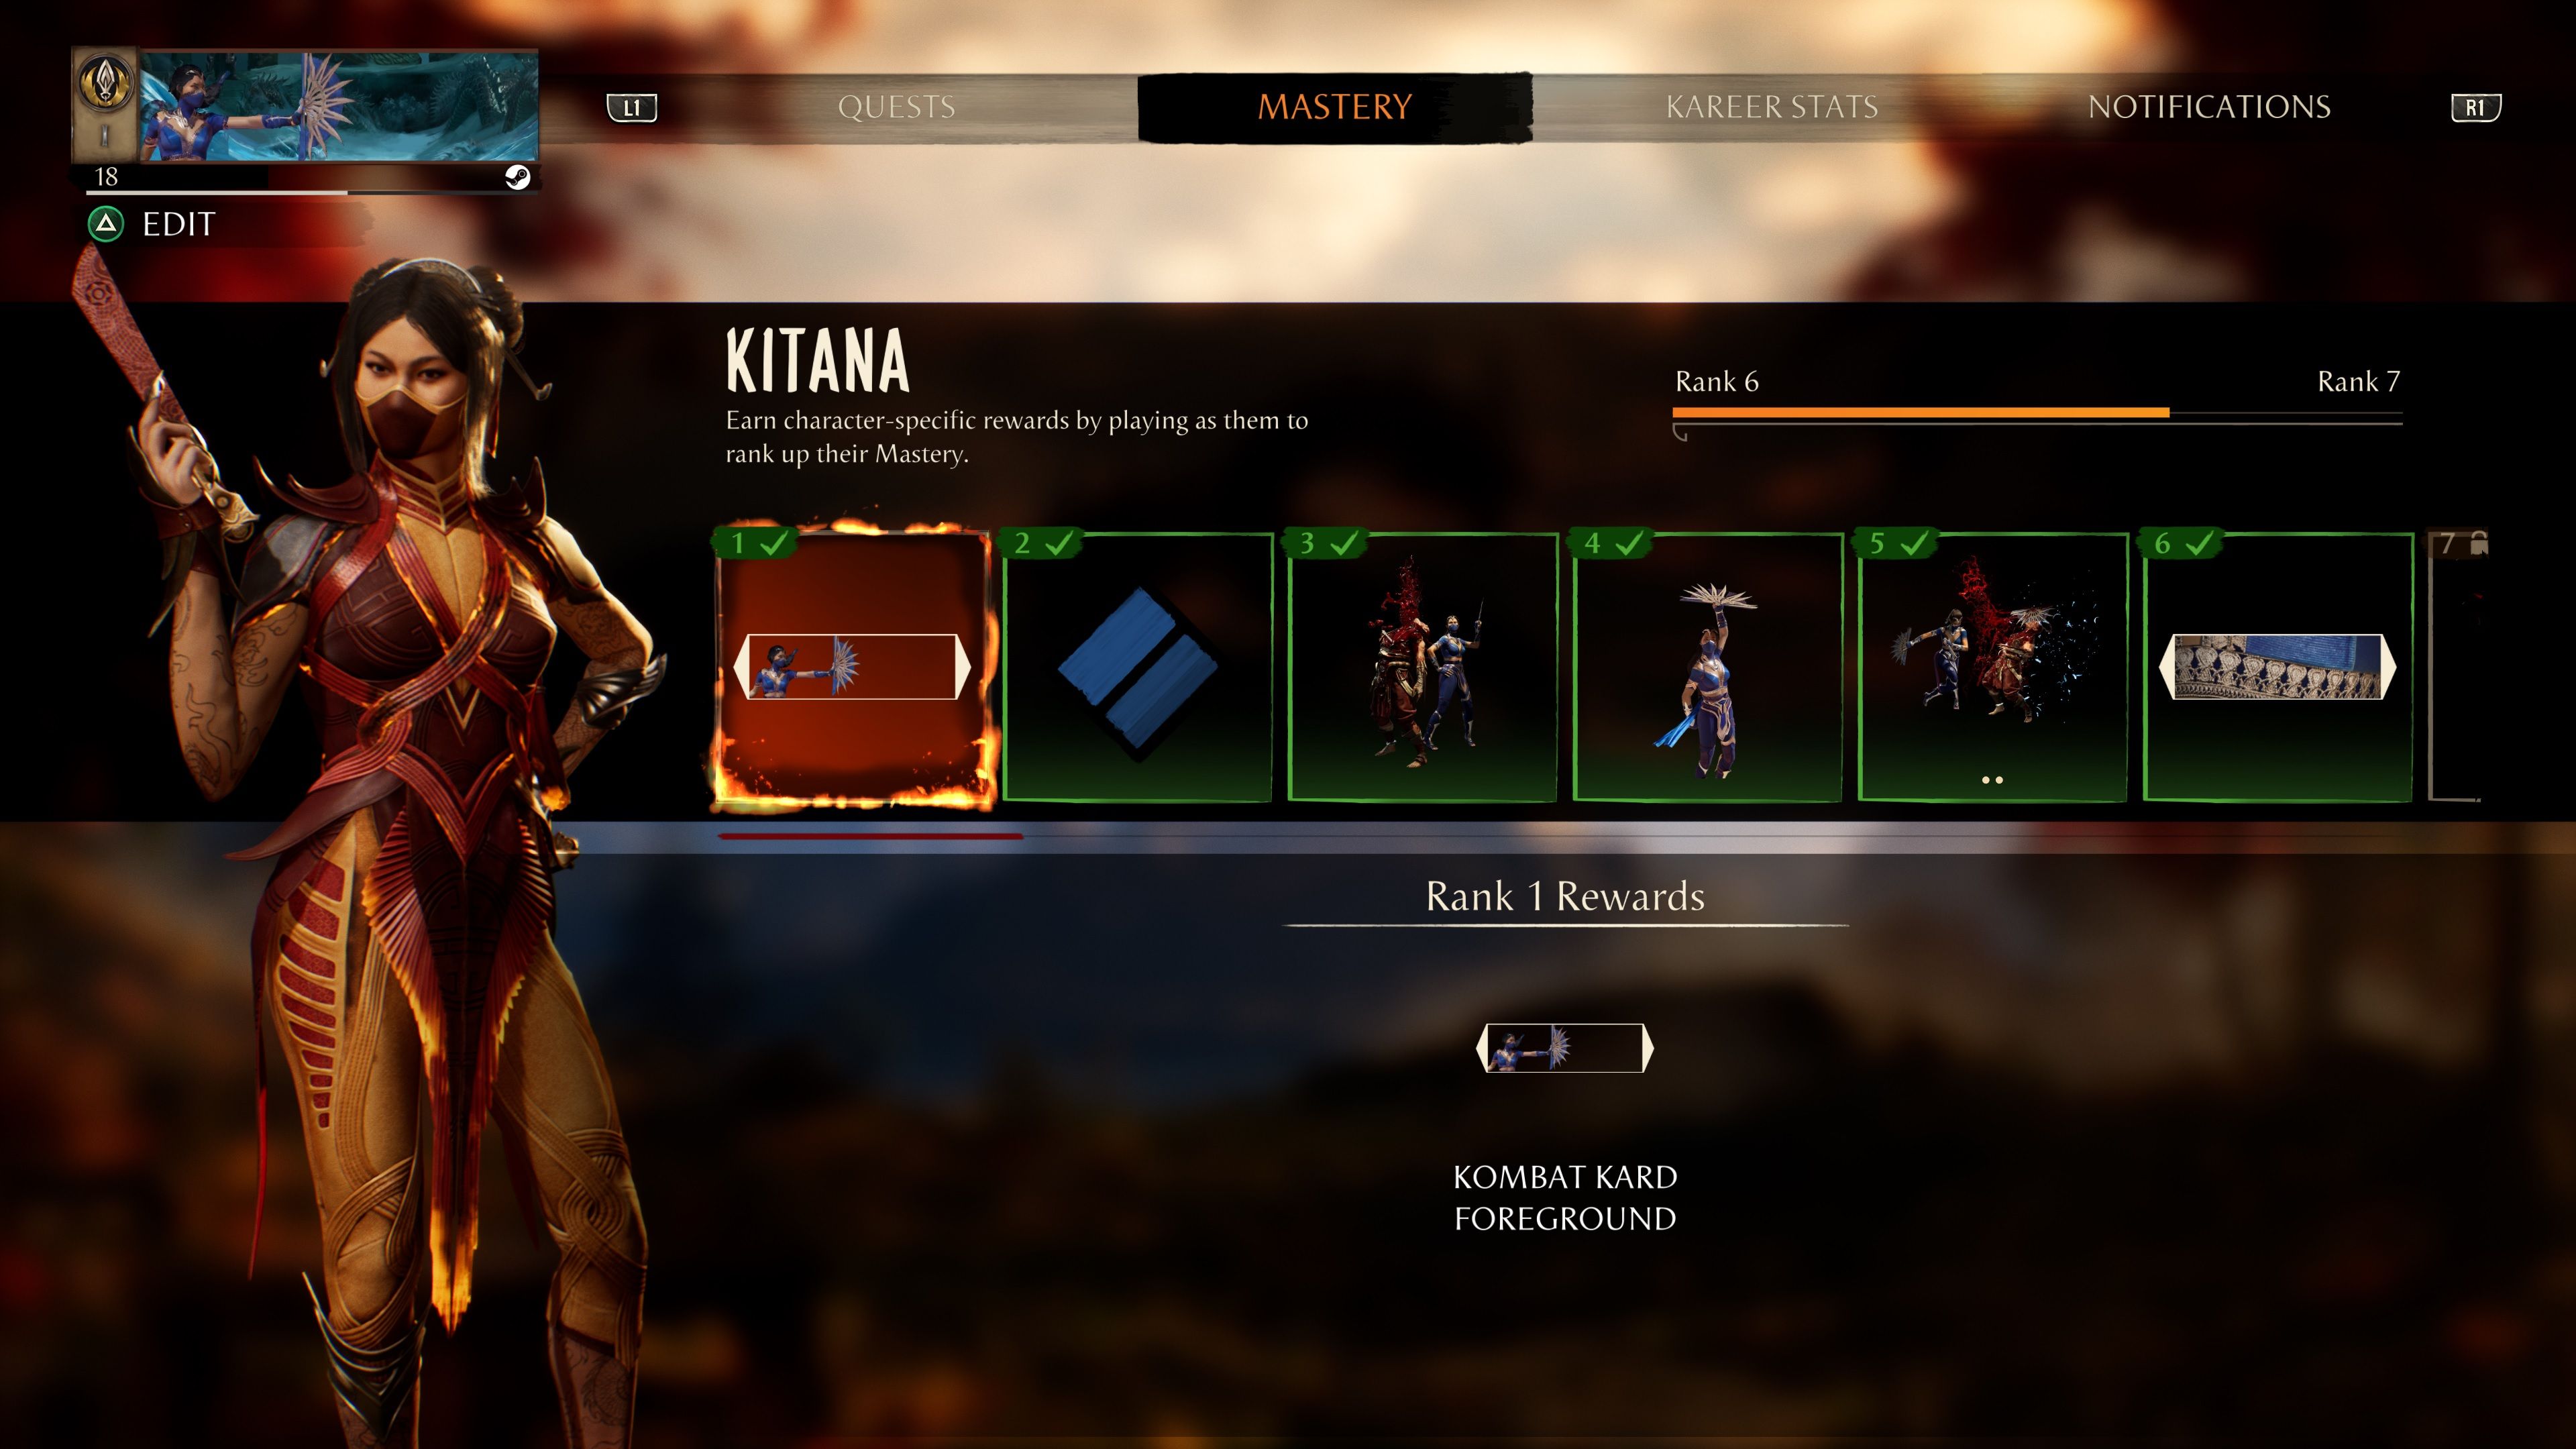 A look at some of the Master Rank Rewards for Kitana in Mortal Kombat 1